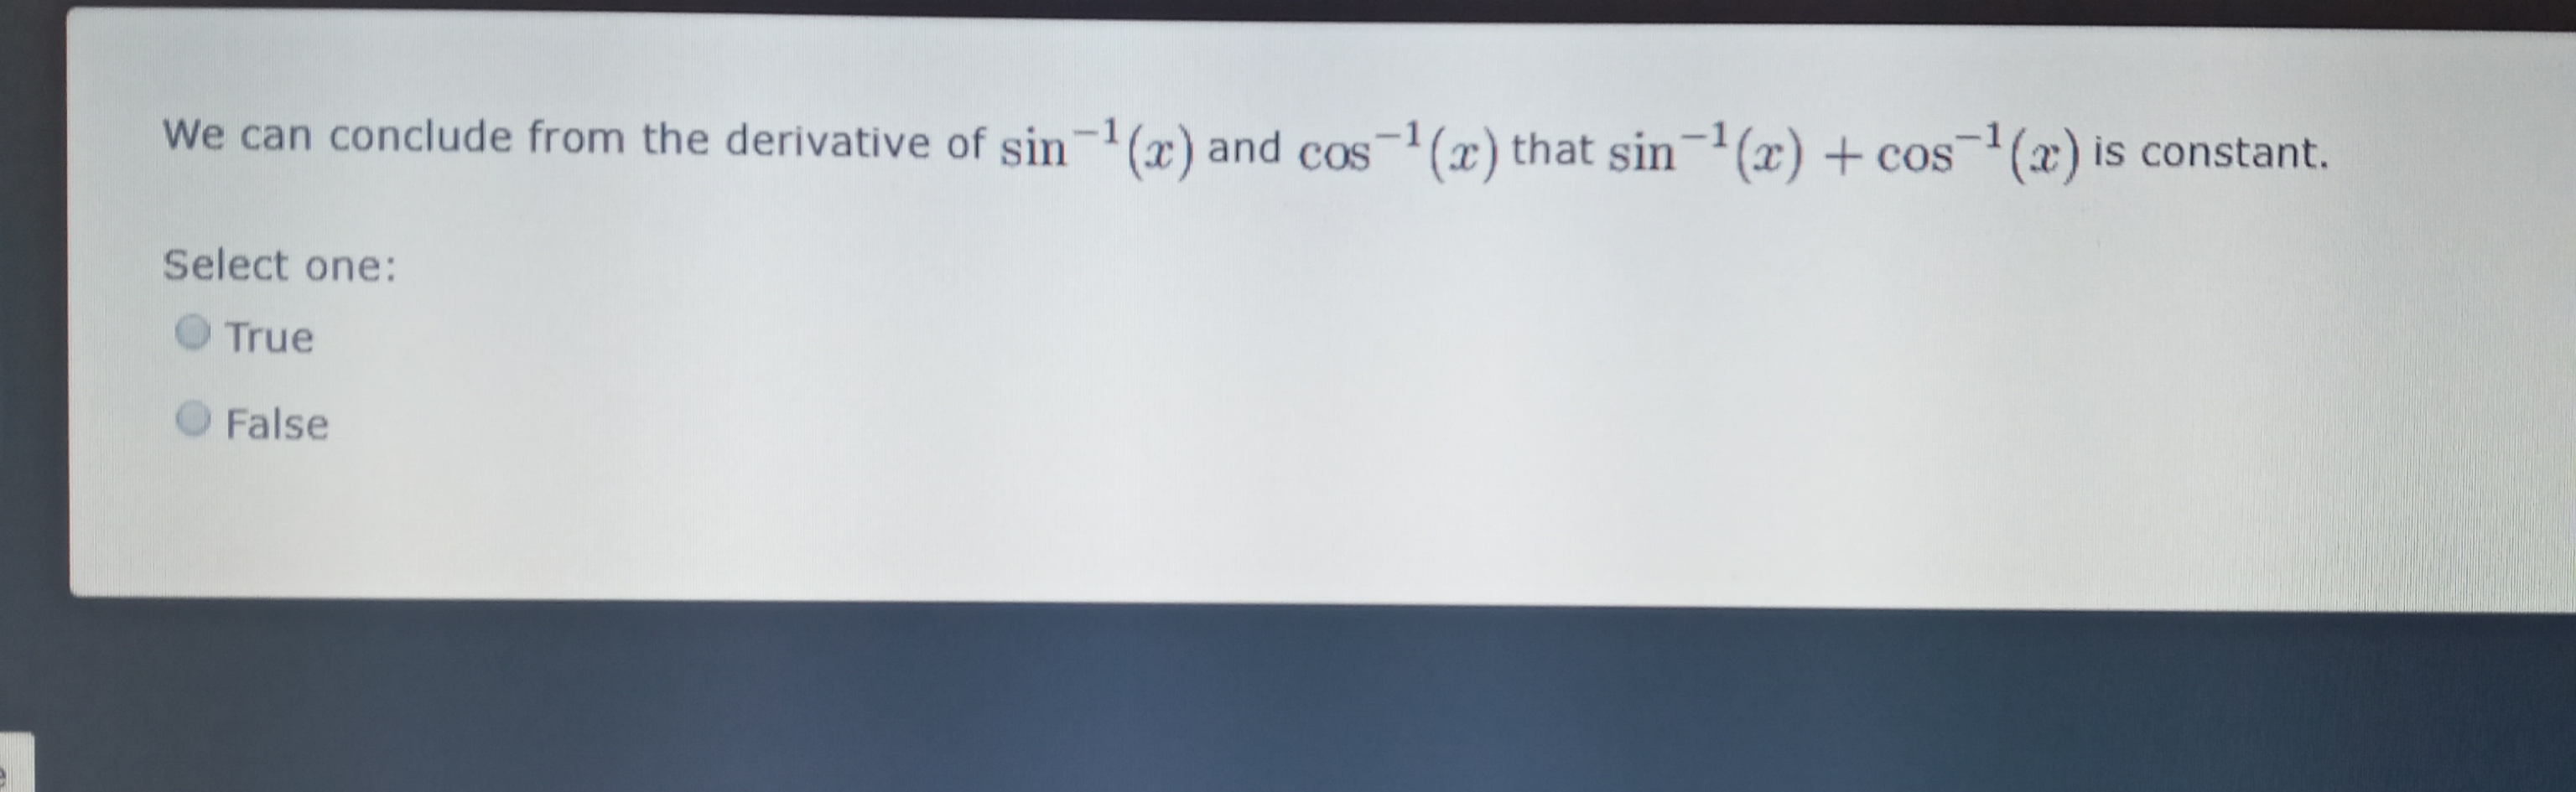 -1
We can conclude from the derivative of sin-1(x)and cos-1(x) that sin-(x) + cos¯(x) is constant.
Select one:
True
O False
